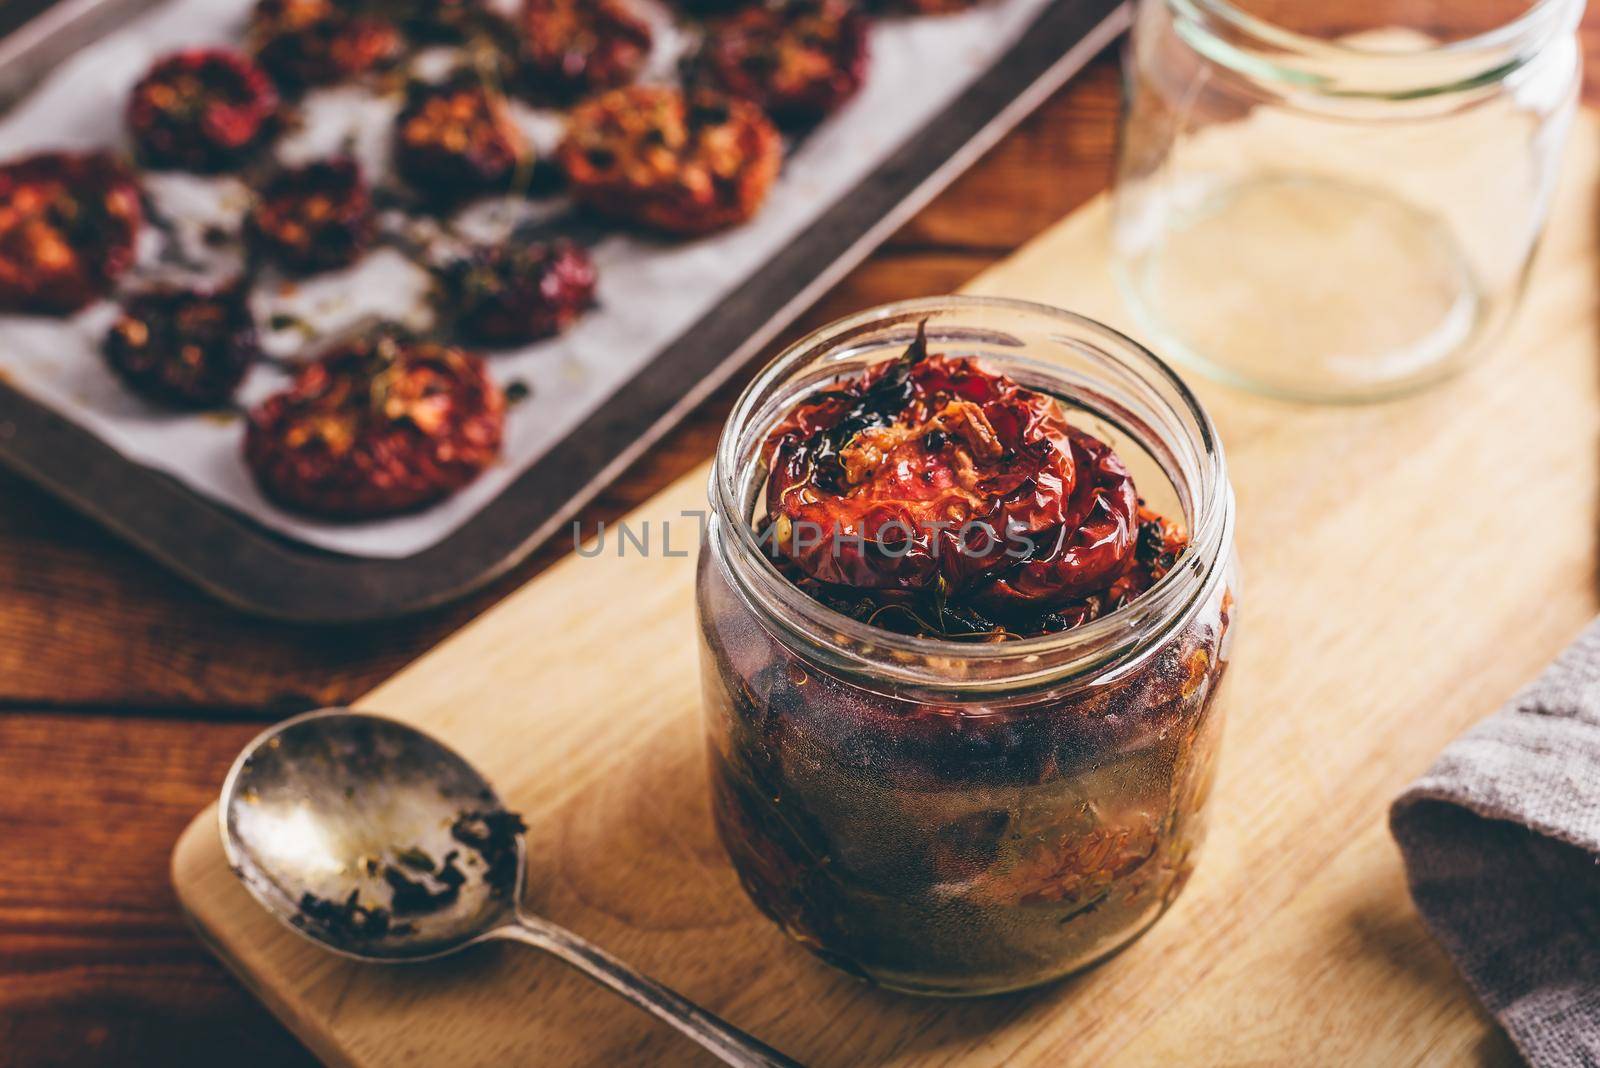 Prepared Sun Dried Tomatoes with Oil and Herbs in a Jar by Seva_blsv